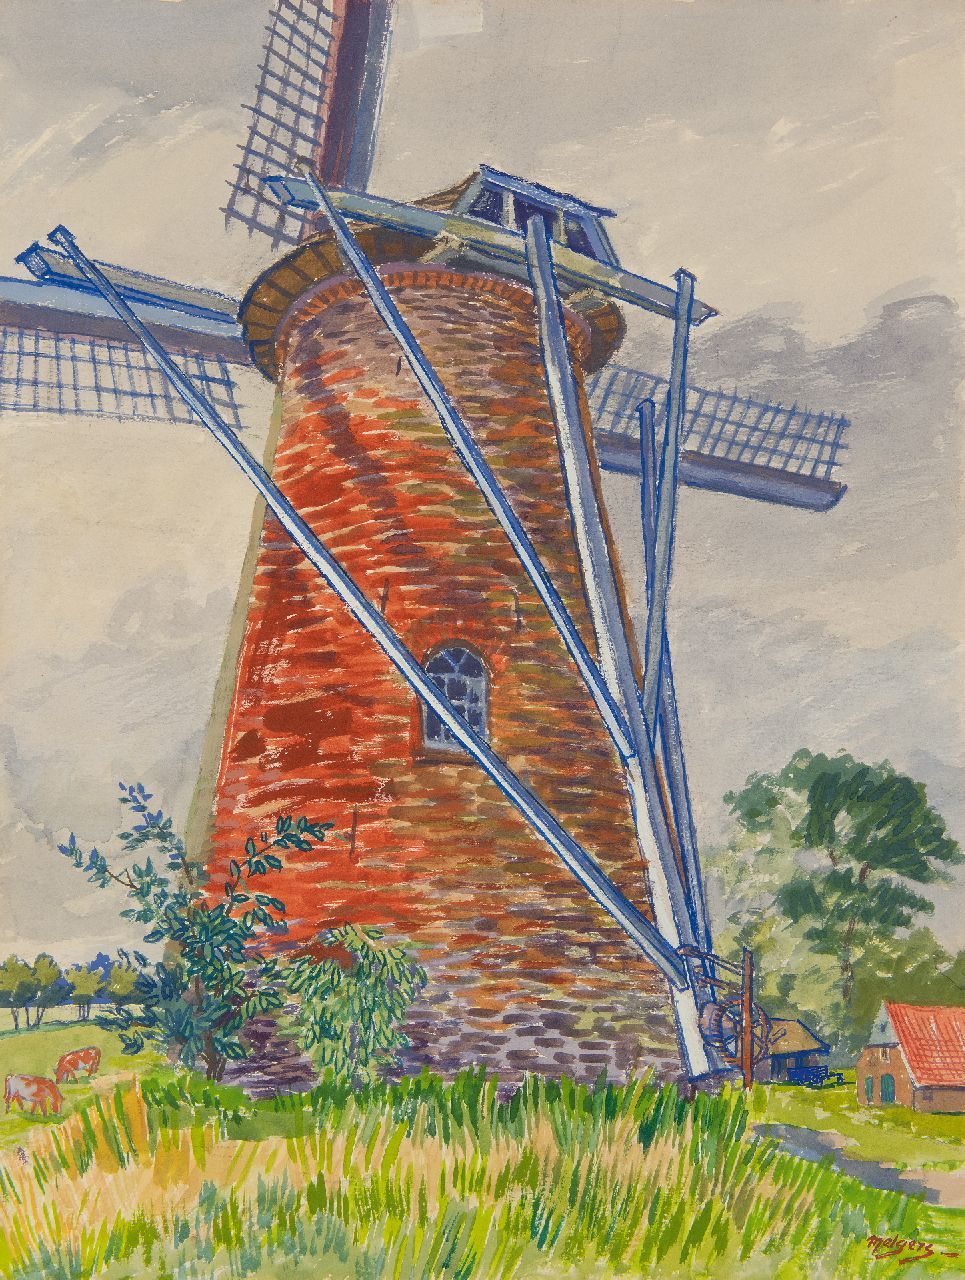 Melgers H.J.  | Hendrik Johan 'Henk' Melgers | Watercolours and drawings offered for sale | Windmill, gouache on paper 49.4 x 37.2 cm, signed l.r.